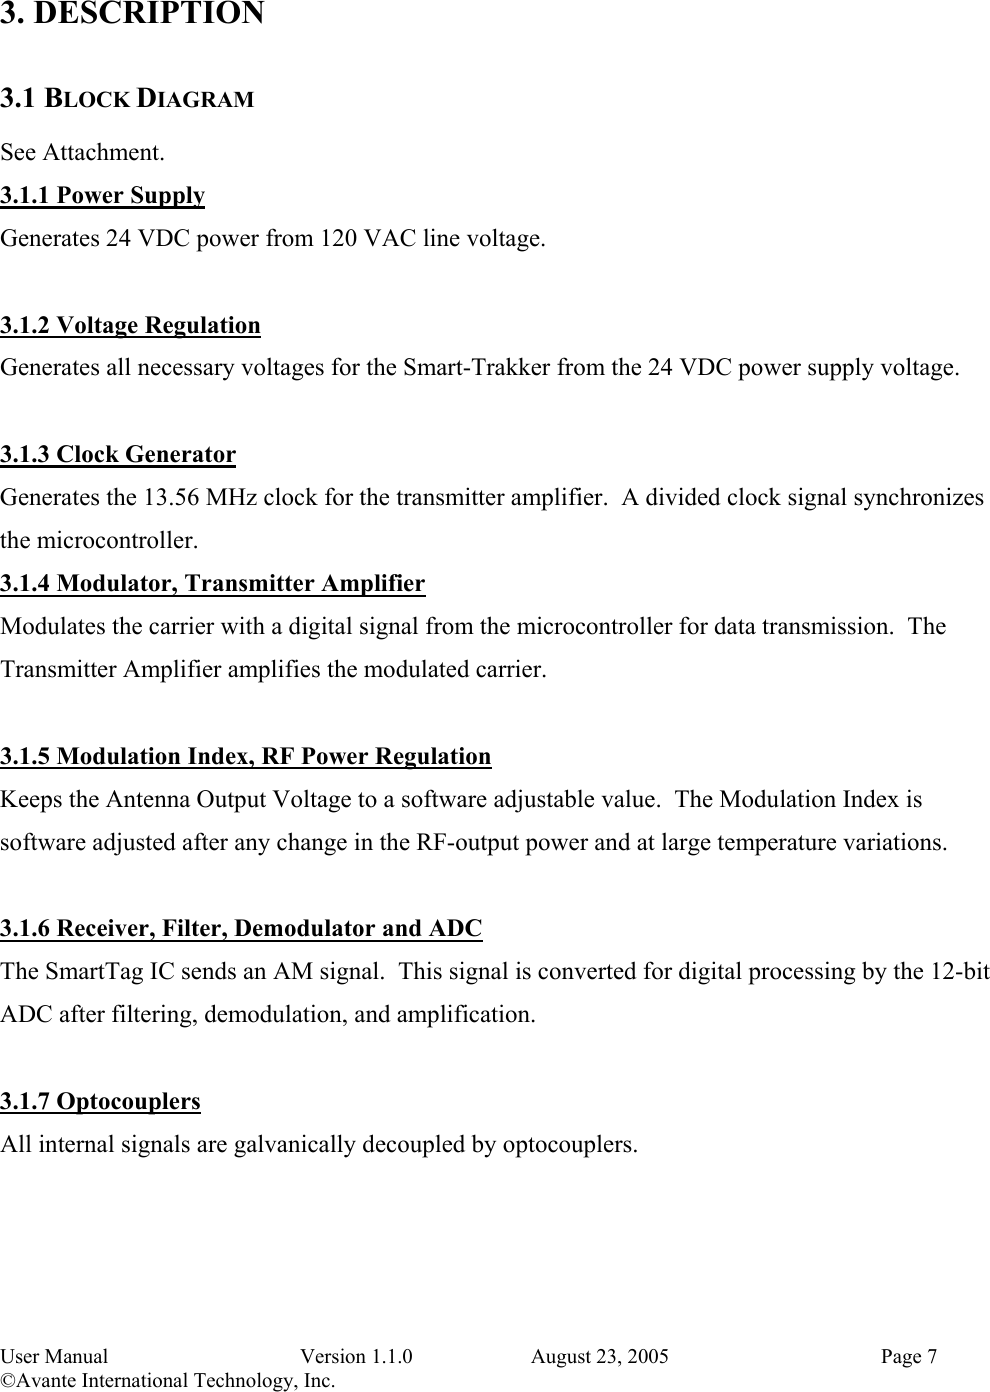 User Manual   Version 1.1.0   August 23, 2005    Page 7 ©Avante International Technology, Inc.   3. DESCRIPTION 3.1 BLOCK DIAGRAM See Attachment. 3.1.1 Power Supply Generates 24 VDC power from 120 VAC line voltage.  3.1.2 Voltage Regulation Generates all necessary voltages for the Smart-Trakker from the 24 VDC power supply voltage.  3.1.3 Clock Generator Generates the 13.56 MHz clock for the transmitter amplifier.  A divided clock signal synchronizes the microcontroller. 3.1.4 Modulator, Transmitter Amplifier Modulates the carrier with a digital signal from the microcontroller for data transmission.  The Transmitter Amplifier amplifies the modulated carrier.  3.1.5 Modulation Index, RF Power Regulation Keeps the Antenna Output Voltage to a software adjustable value.  The Modulation Index is software adjusted after any change in the RF-output power and at large temperature variations.  3.1.6 Receiver, Filter, Demodulator and ADC The SmartTag IC sends an AM signal.  This signal is converted for digital processing by the 12-bit ADC after filtering, demodulation, and amplification.  3.1.7 Optocouplers All internal signals are galvanically decoupled by optocouplers.  